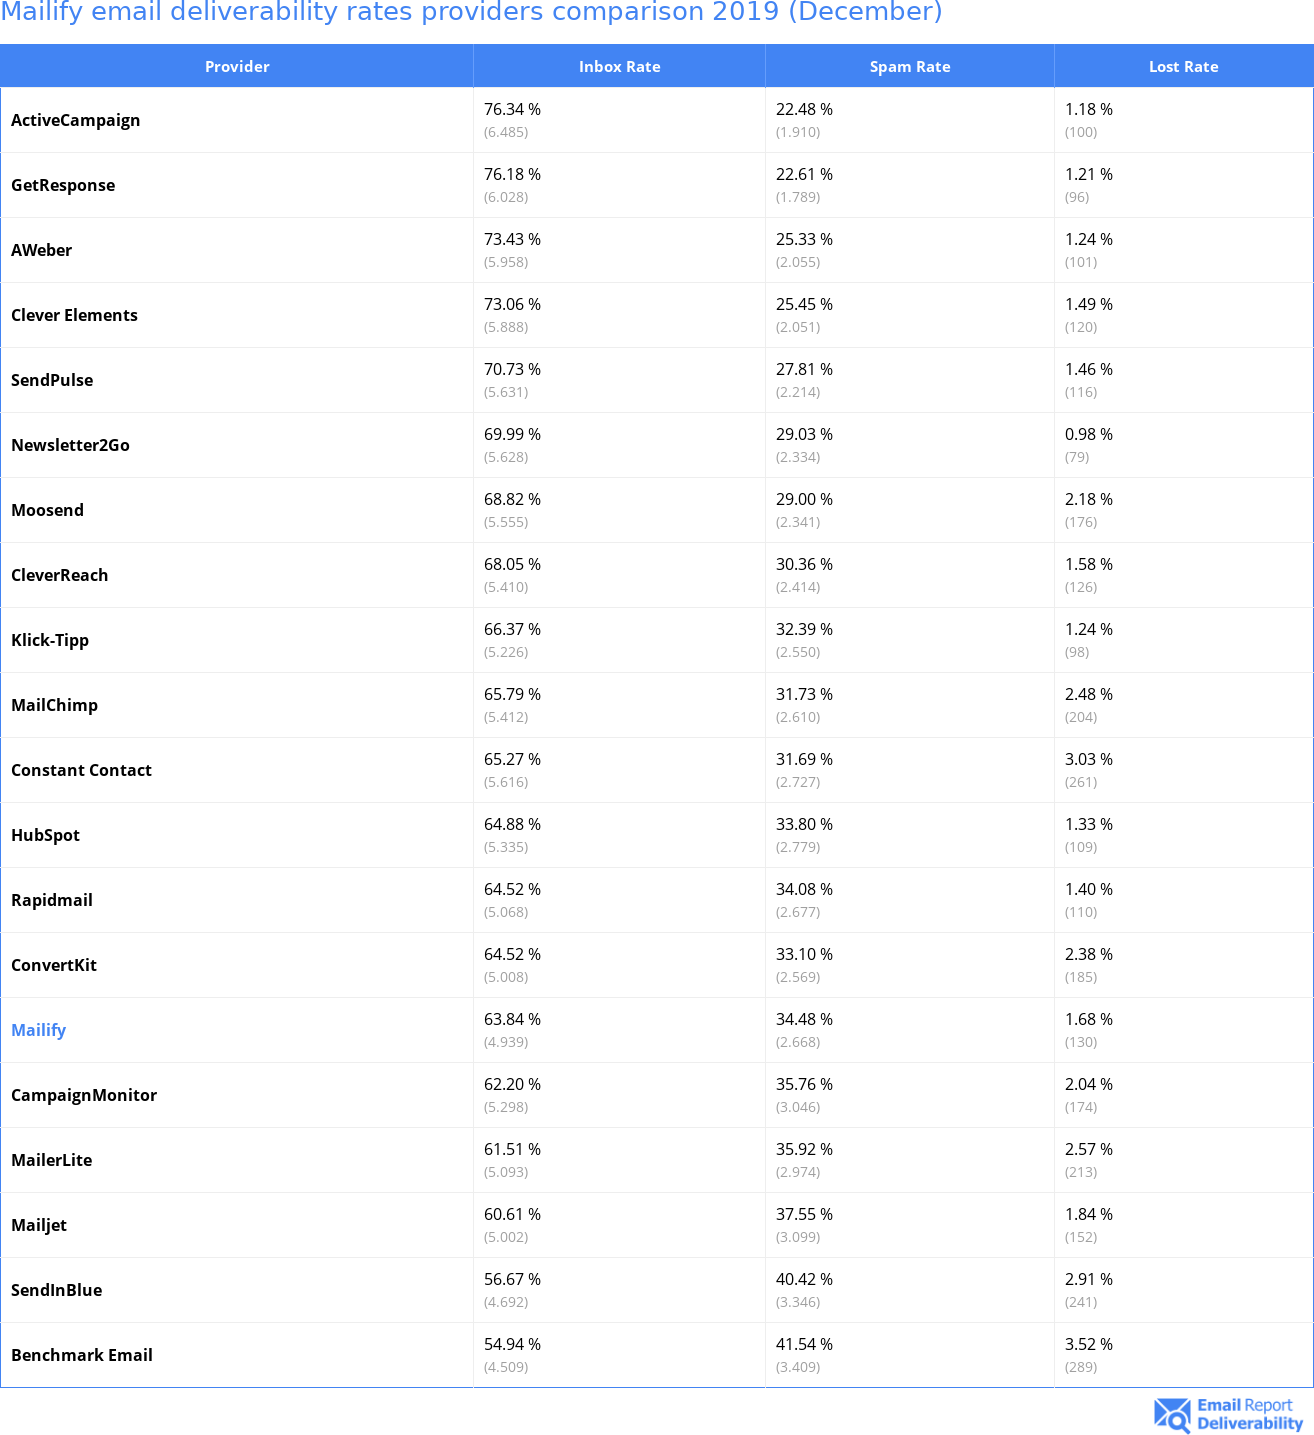 Mailify email deliverability rates providers comparison 2019 (December)